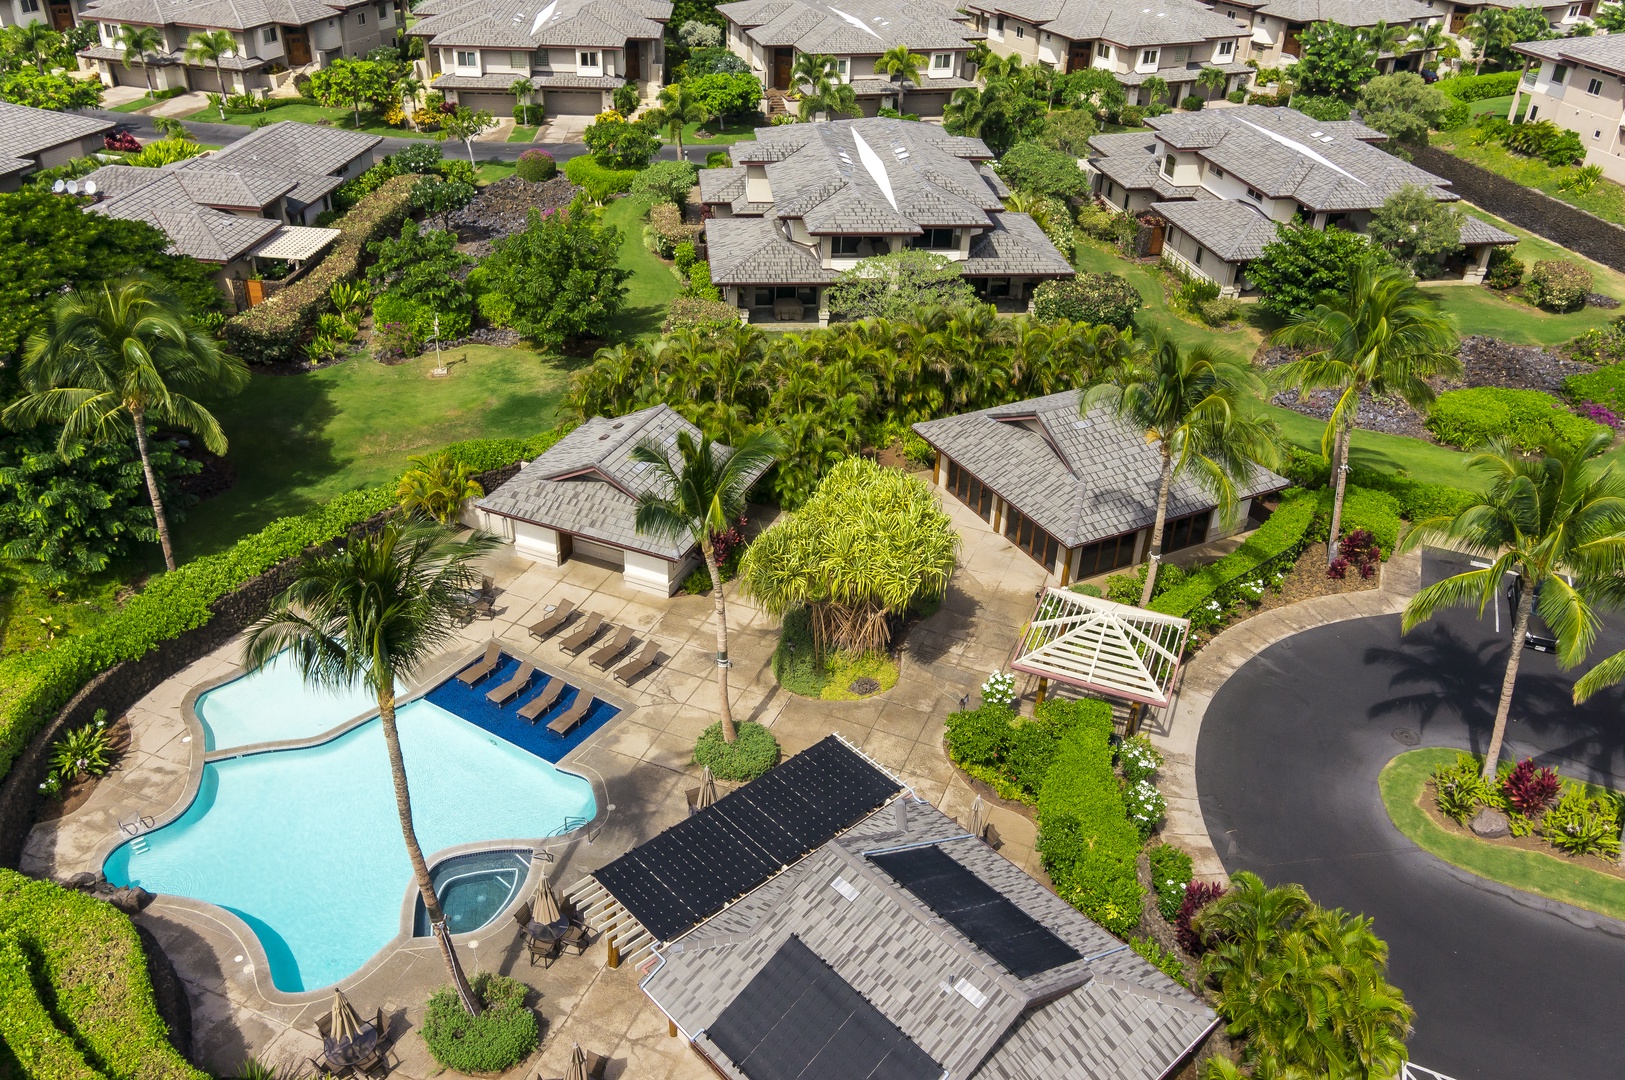 Kamuela Vacation Rentals, Villages at Mauna Lani Resort Unit # 728 - Another pool, and work out facility conveniently located within the Villages community.